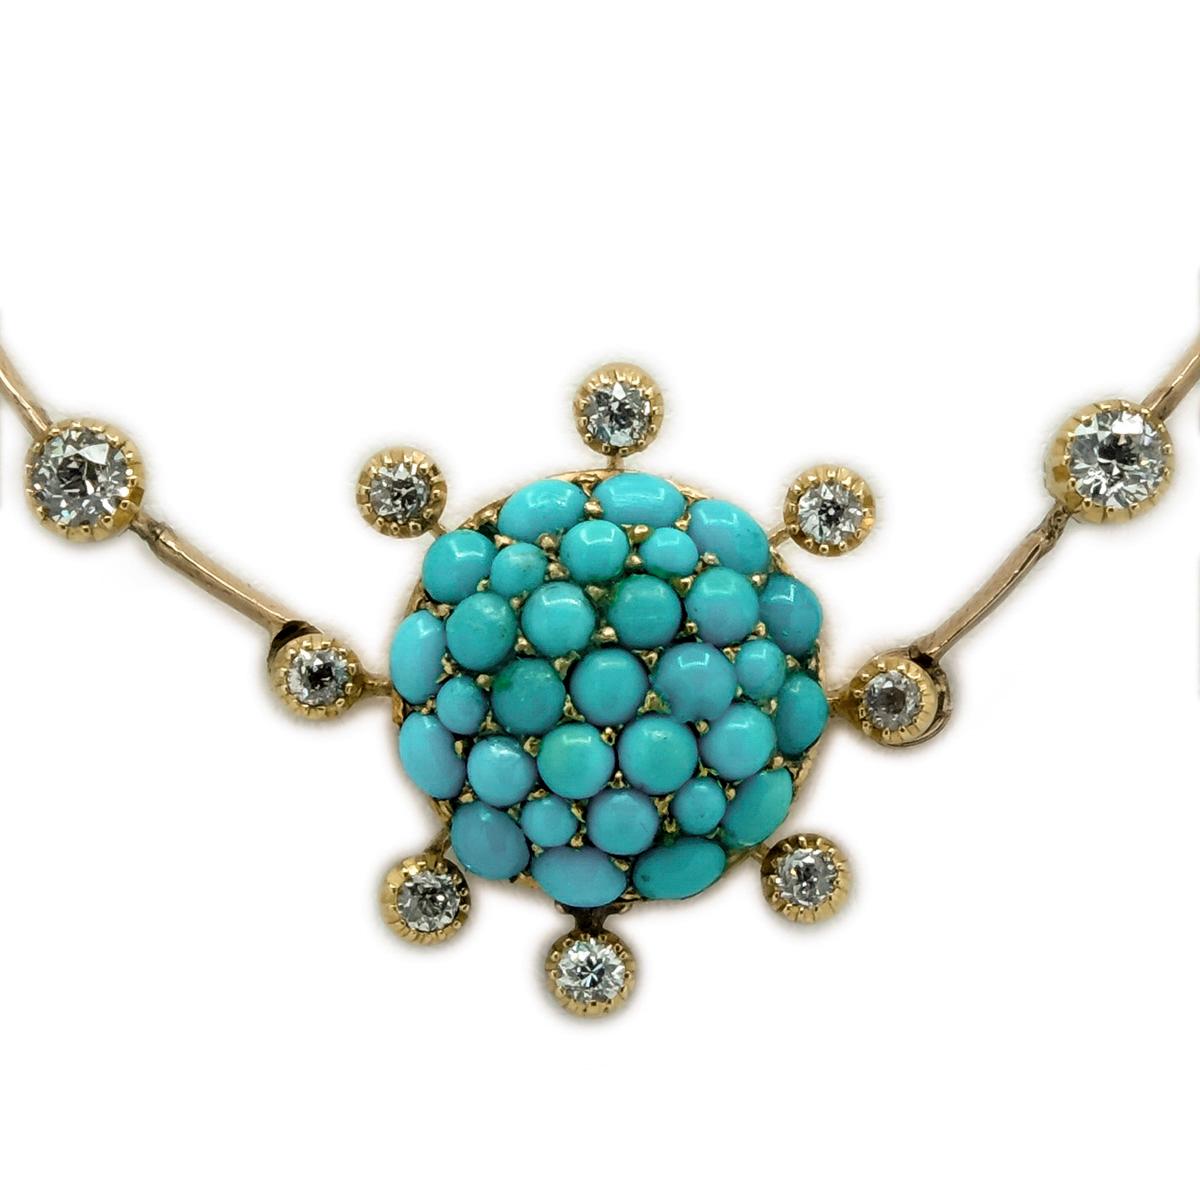 High Victorian Victorian 18 Karat Gold and Persian Turquoise and Old European Diamond Necklace